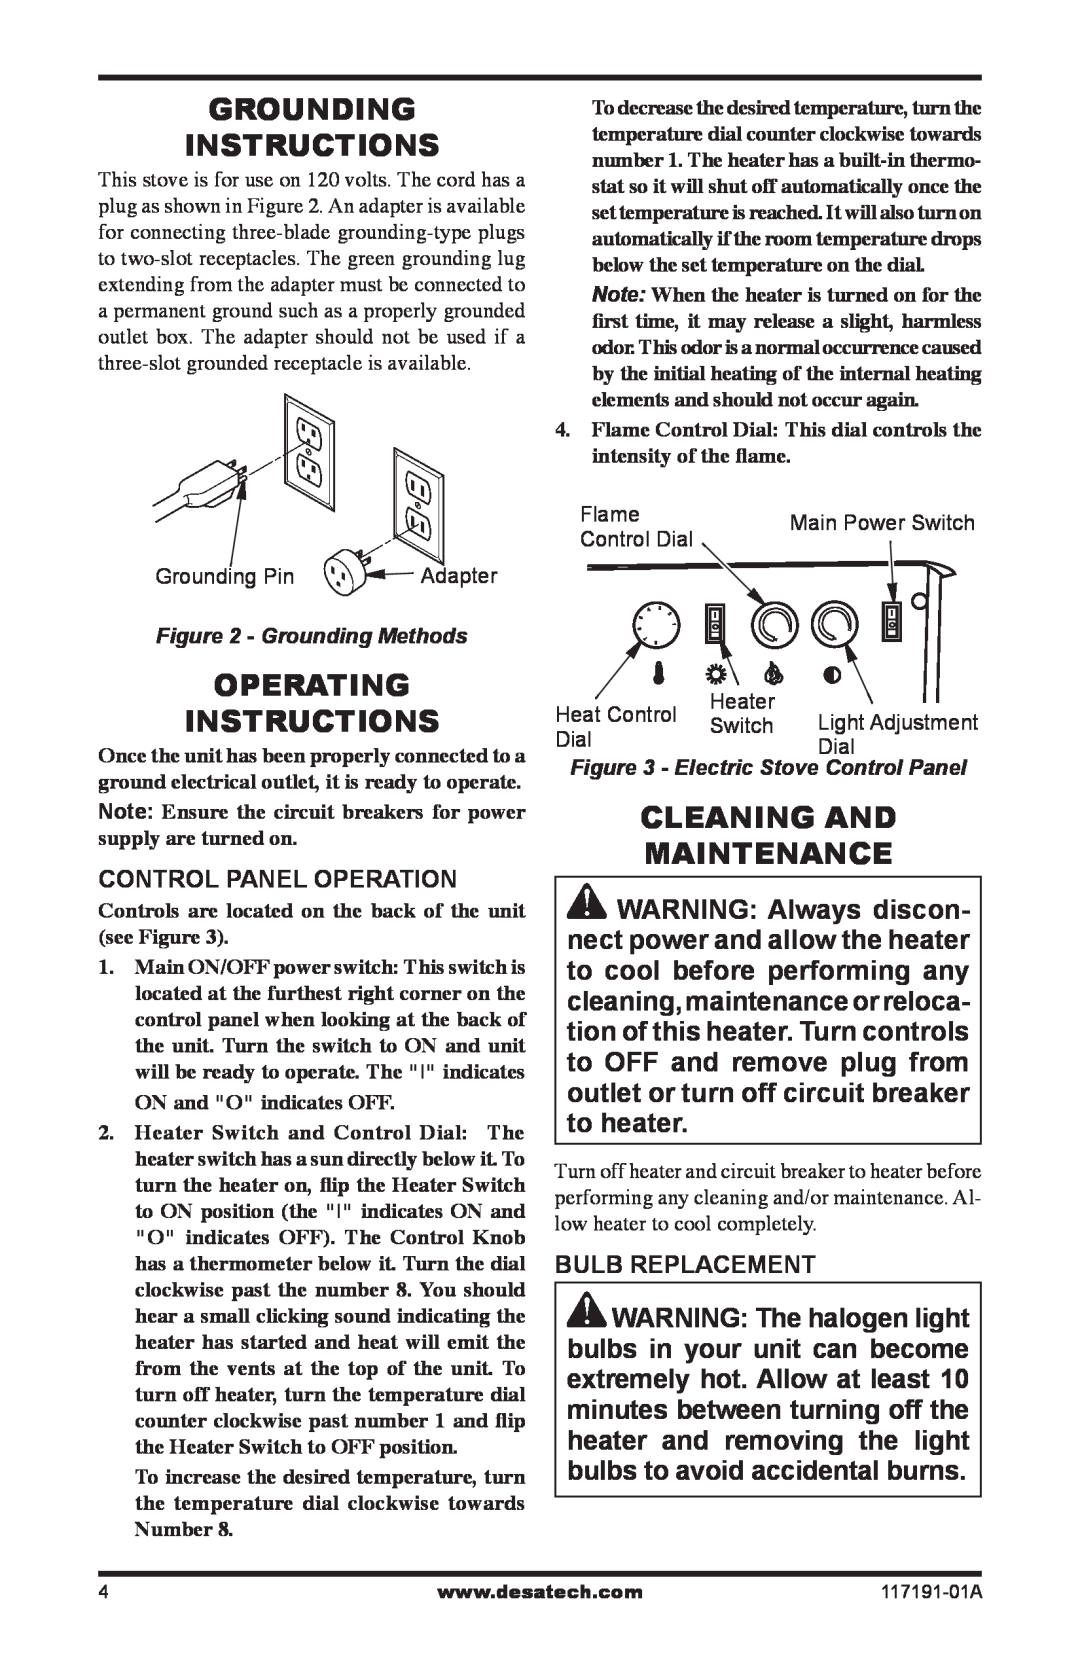 Desa CGESBM Grounding Instructions, Operating Instructions, WARNING Always discon, to cool before performing any 